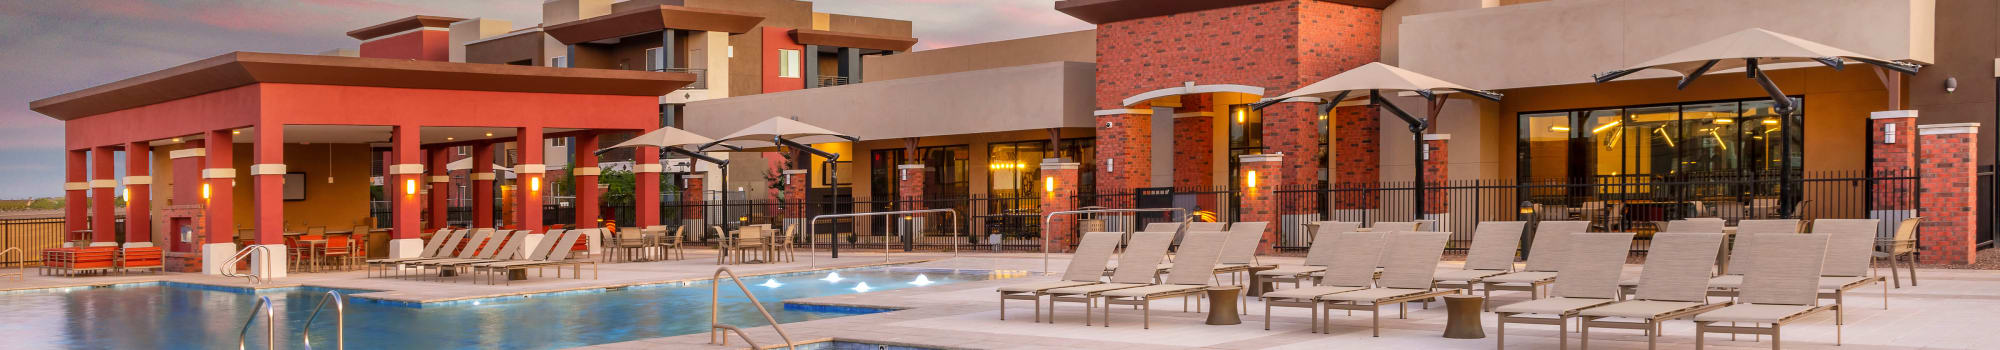 Schedule a tour at The Crossing at Cooley Station in Gilbert, Arizona